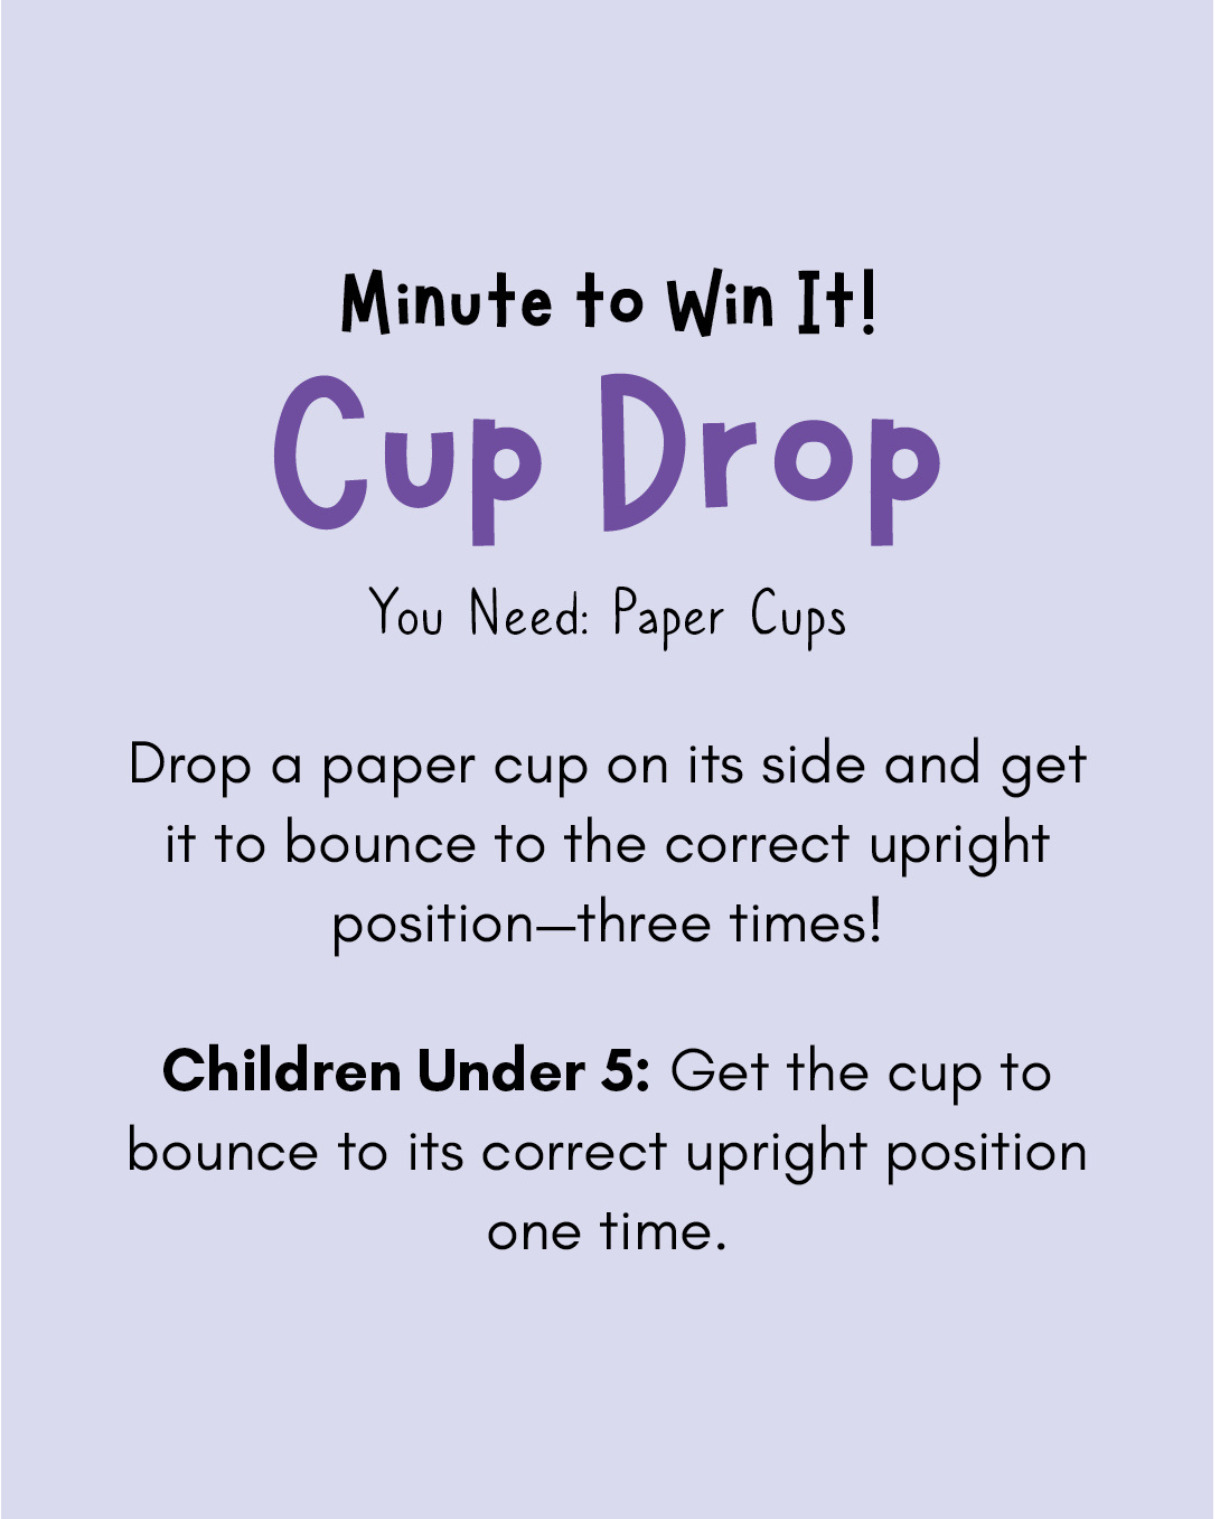 Minute to Win It Games for Families: Cup Drop